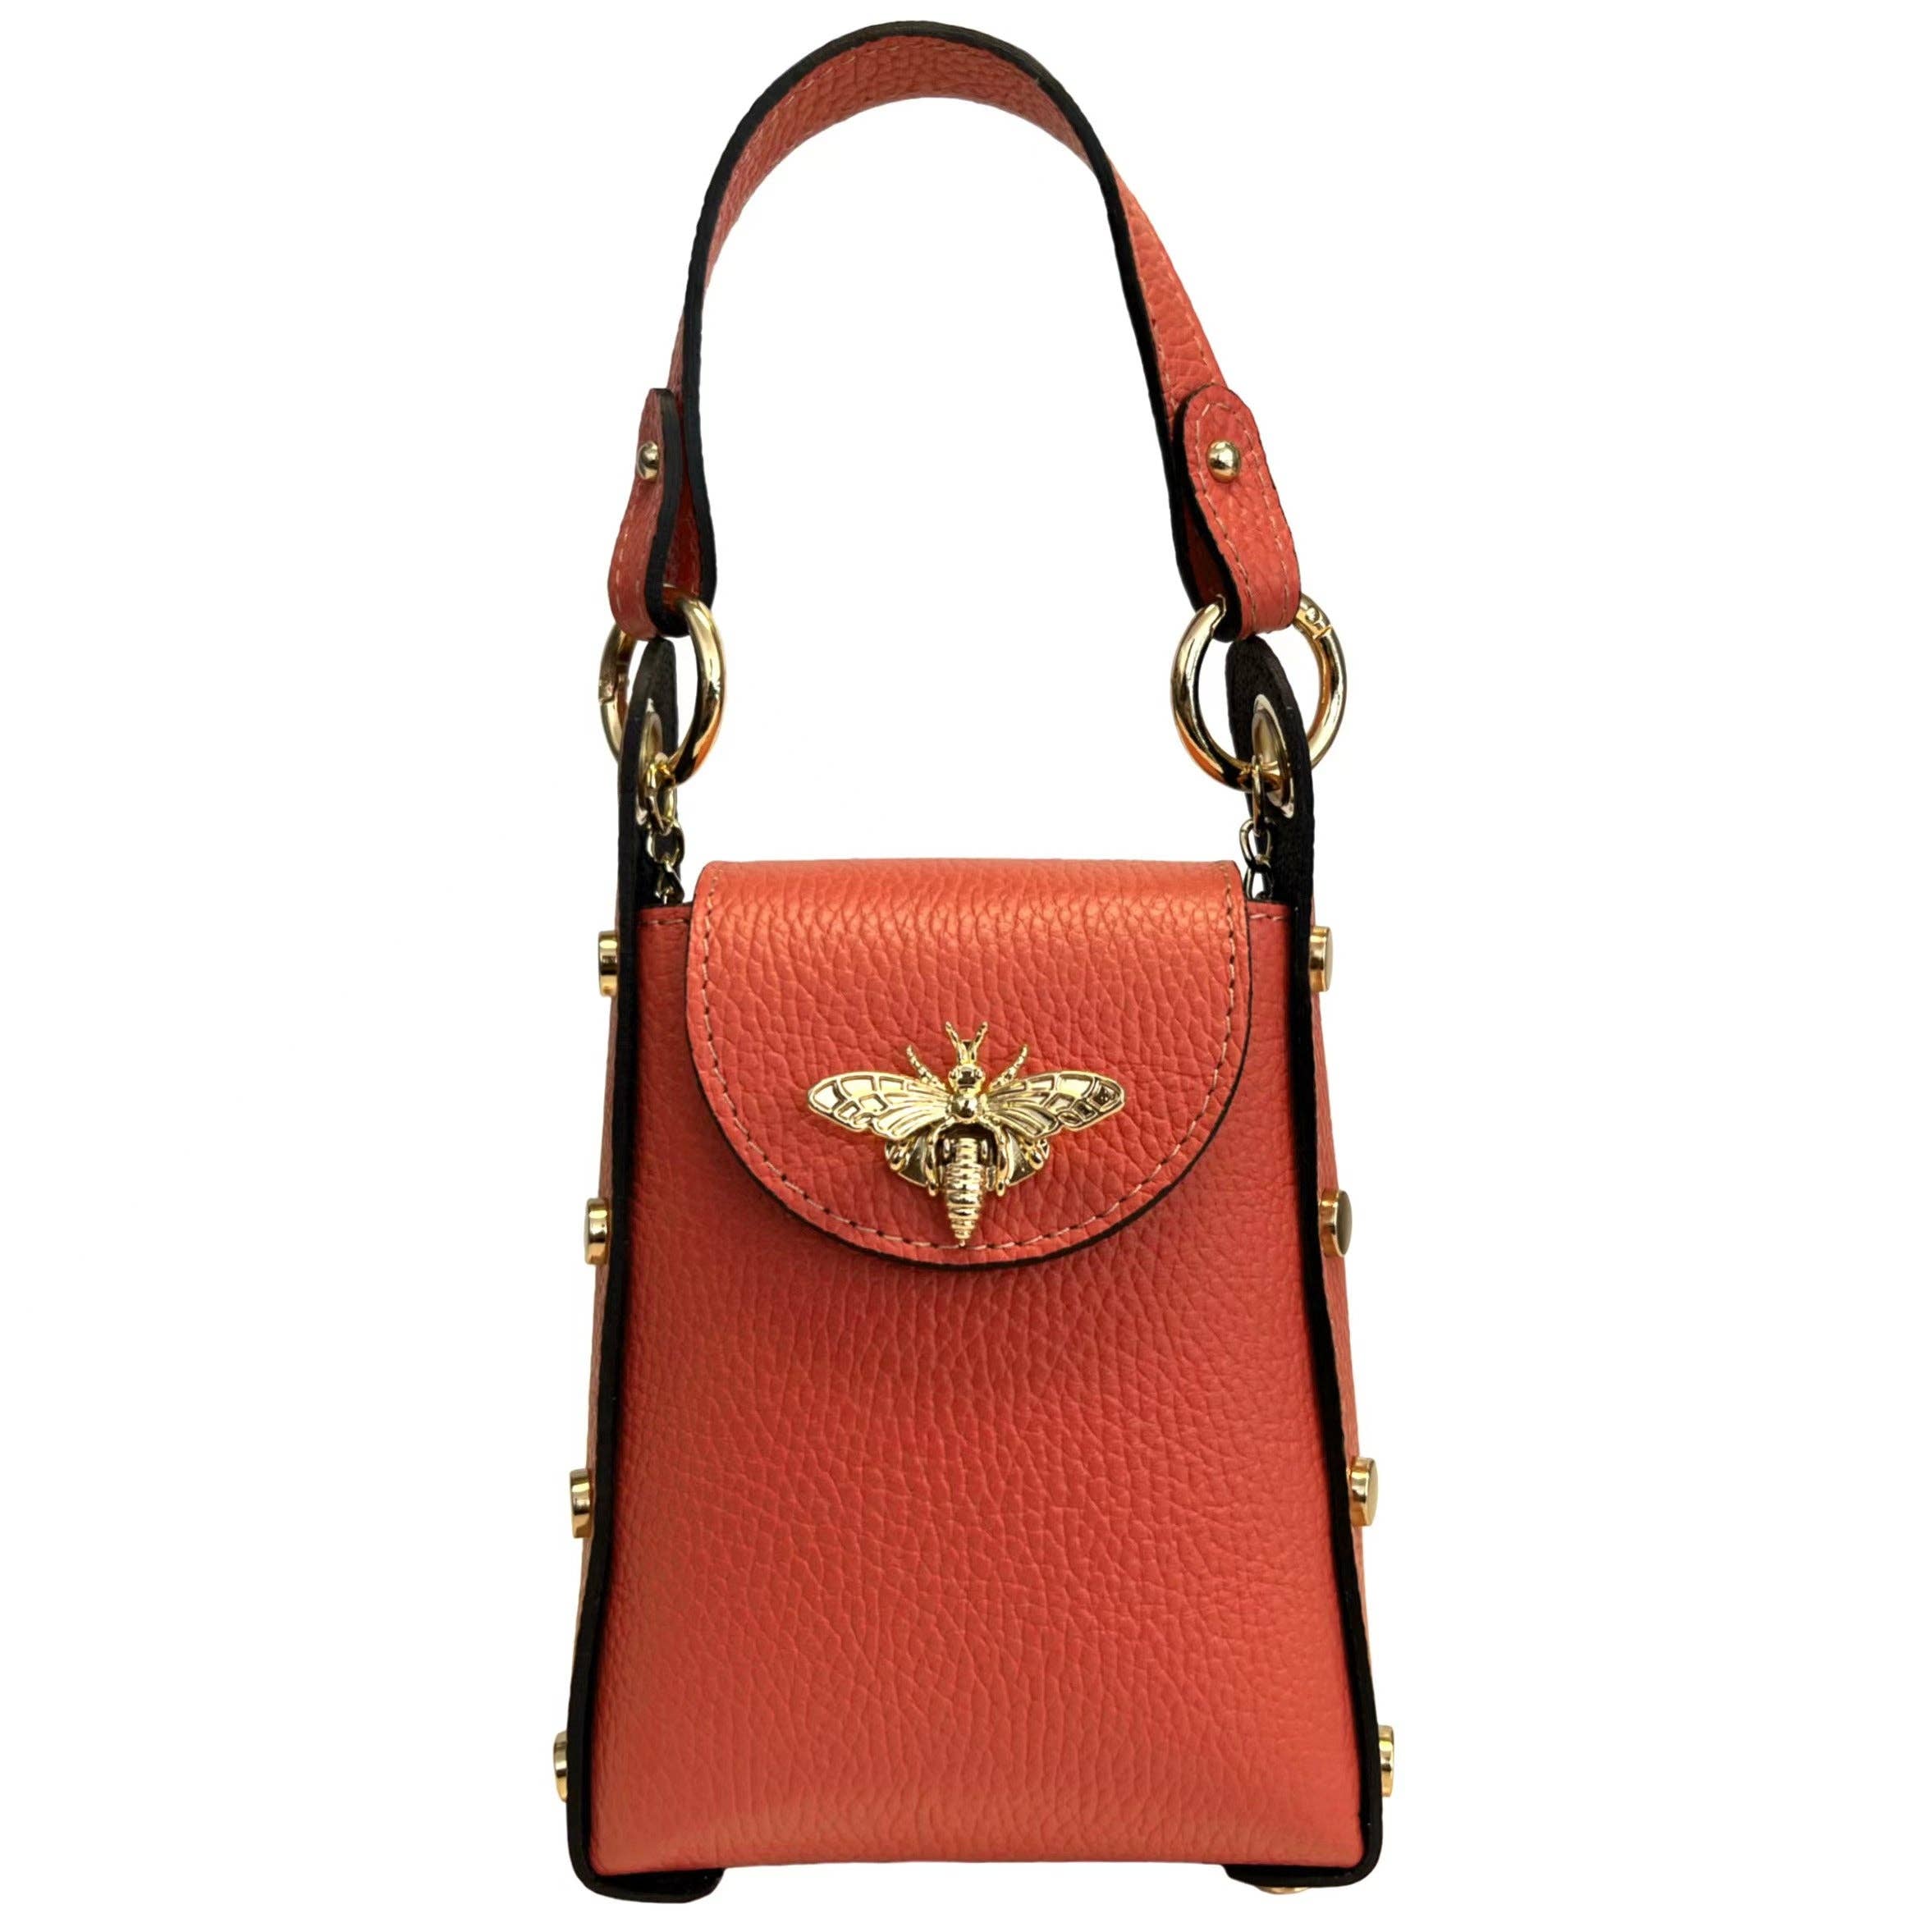 Modarno mini bag in genuine leather dollar with bee-shaped lobster closure - Coco and lulu boutique 